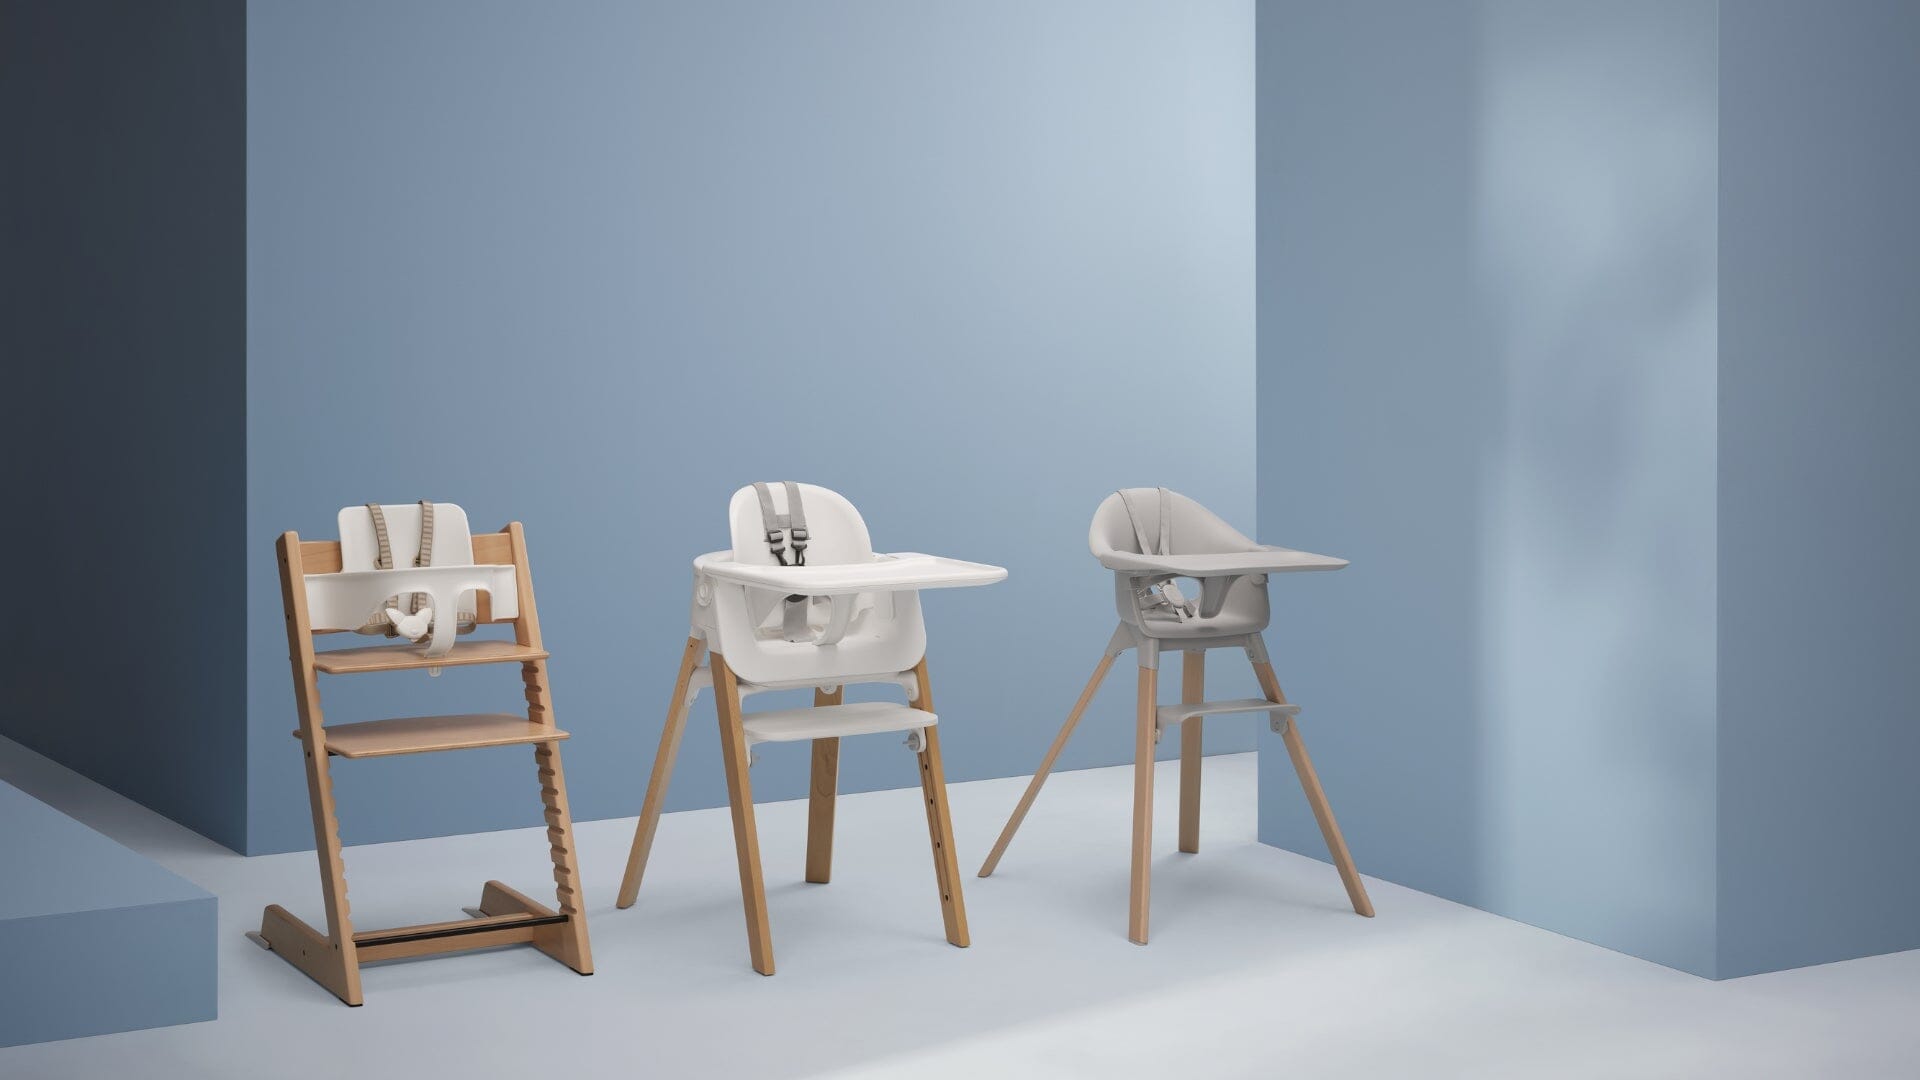 How to use the Stokke Tripp Trapp chair at a kitchen island